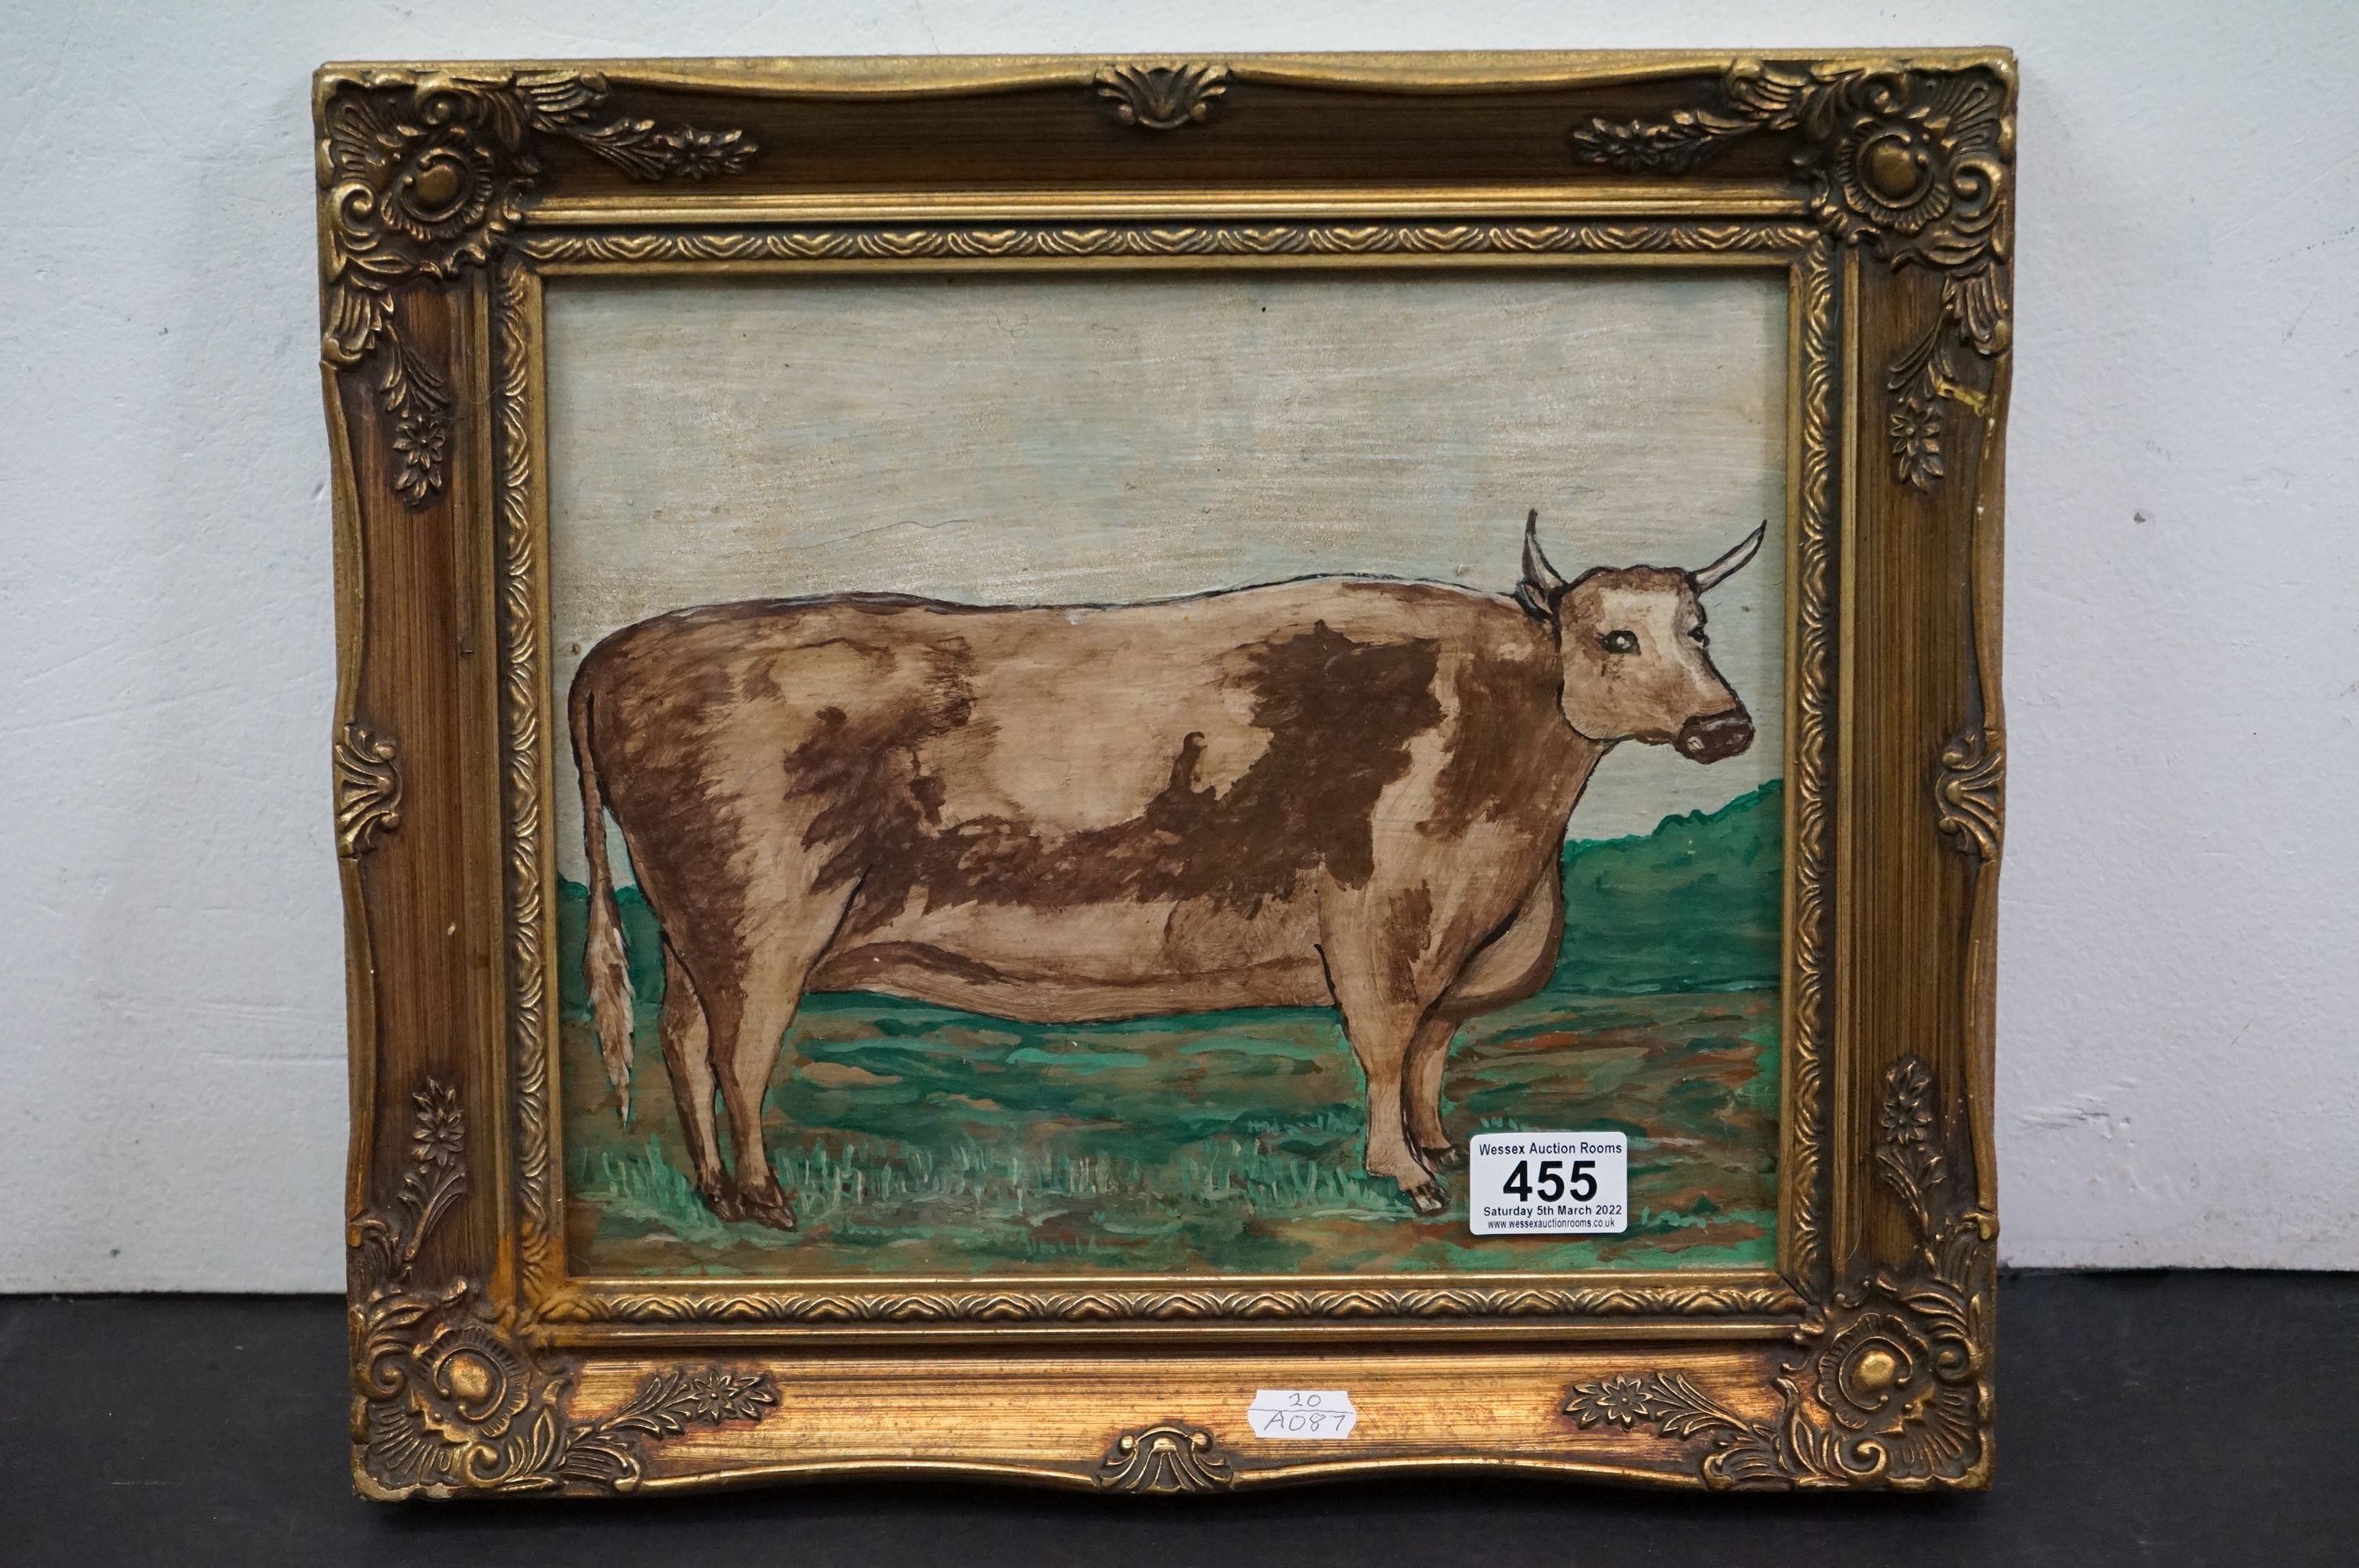 Oil painting of a bull in a landscape setting, 29cm x 24cm, framed and glazed